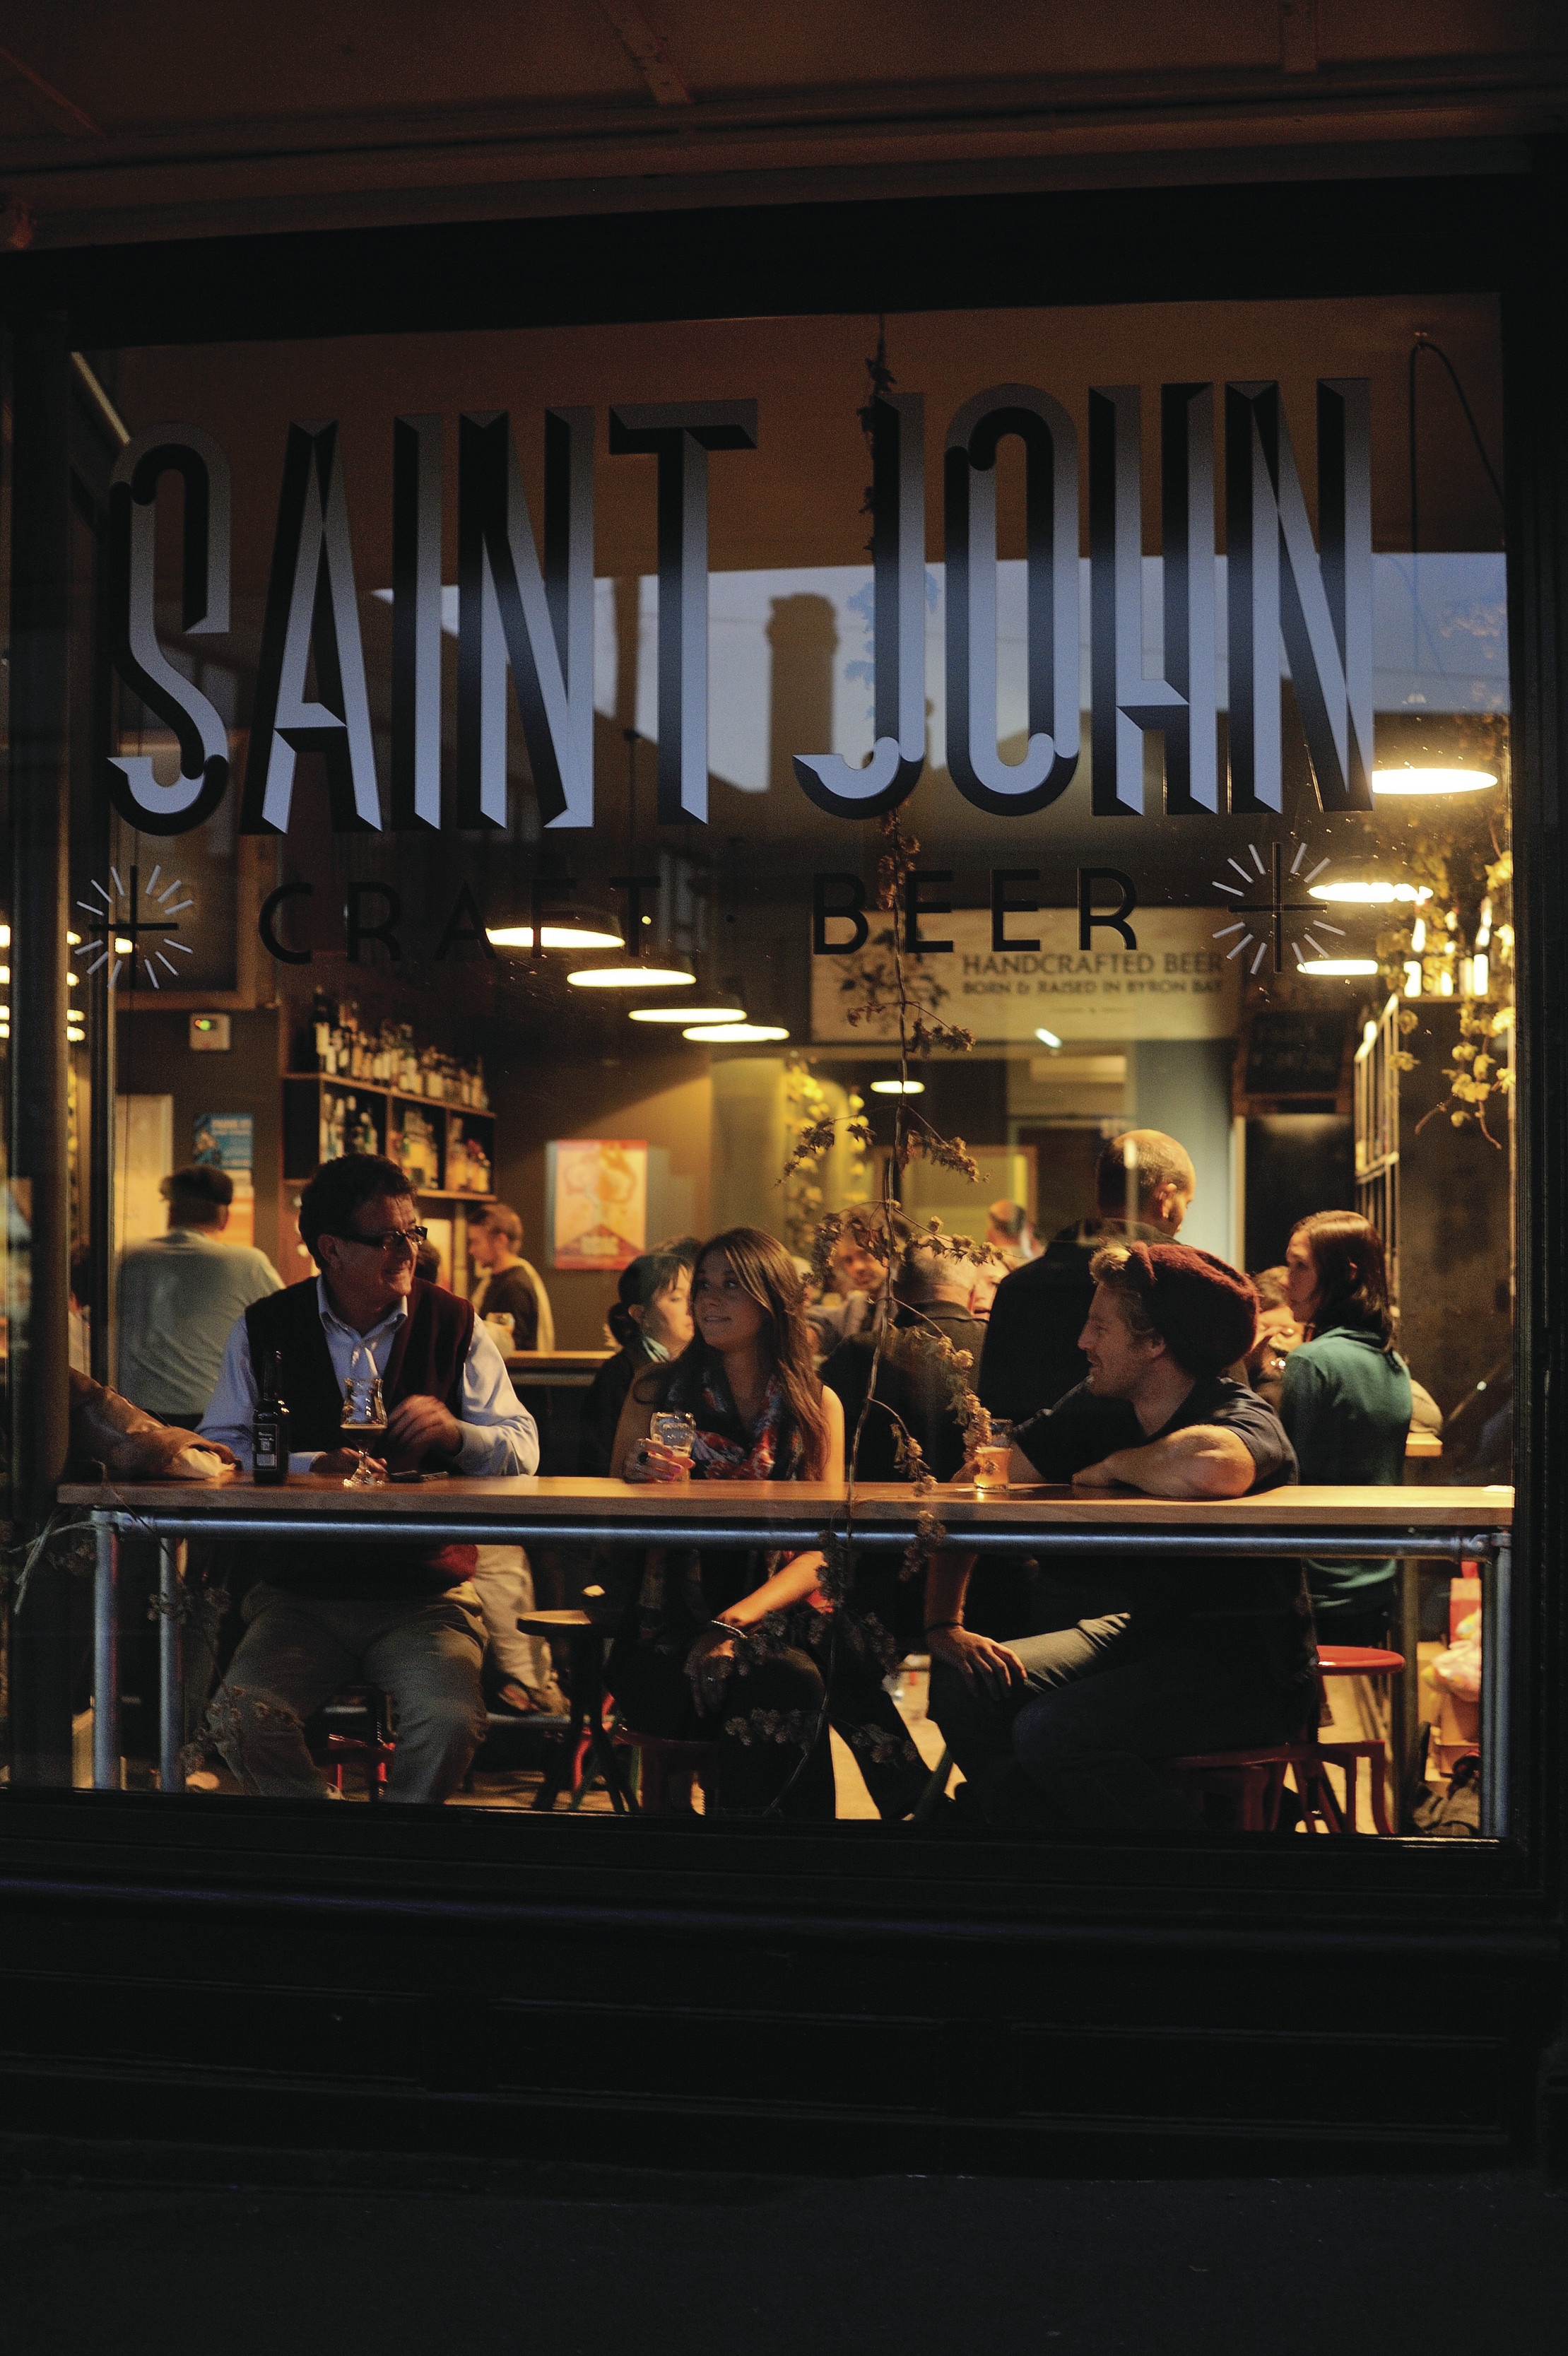 "Image taken outside of the Saint John Craft Beer, of the front window with a group of three having a drink and socialising. "